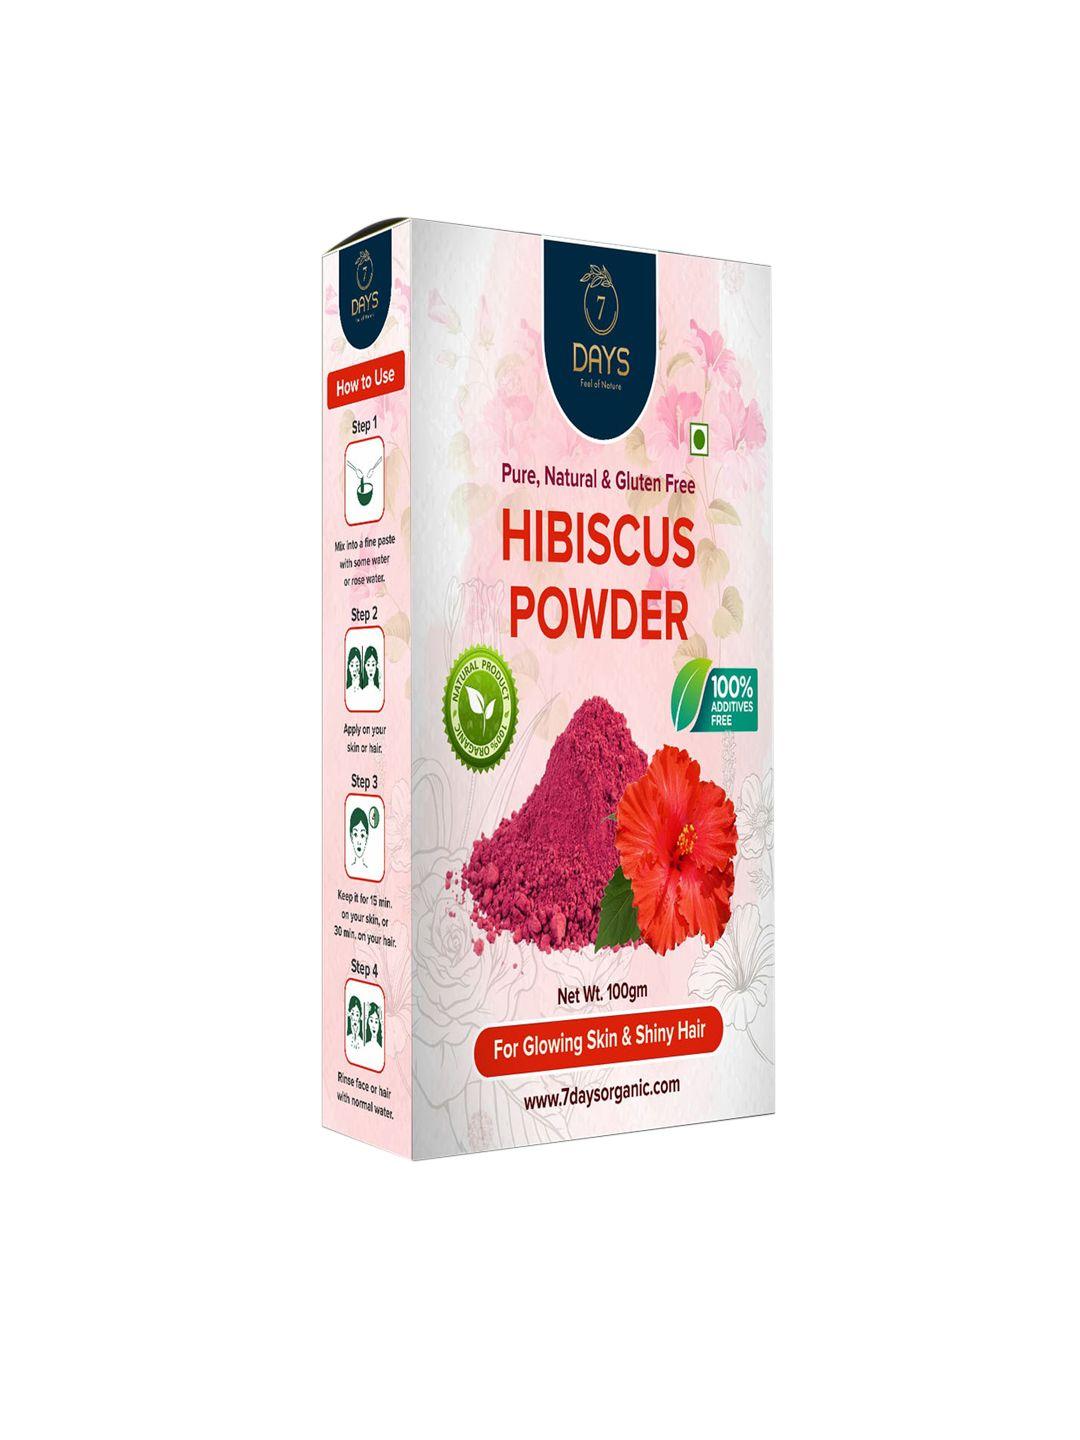 7 days 100% natural & pure hibiscus powder for shiny hair & glowing skin-100 g